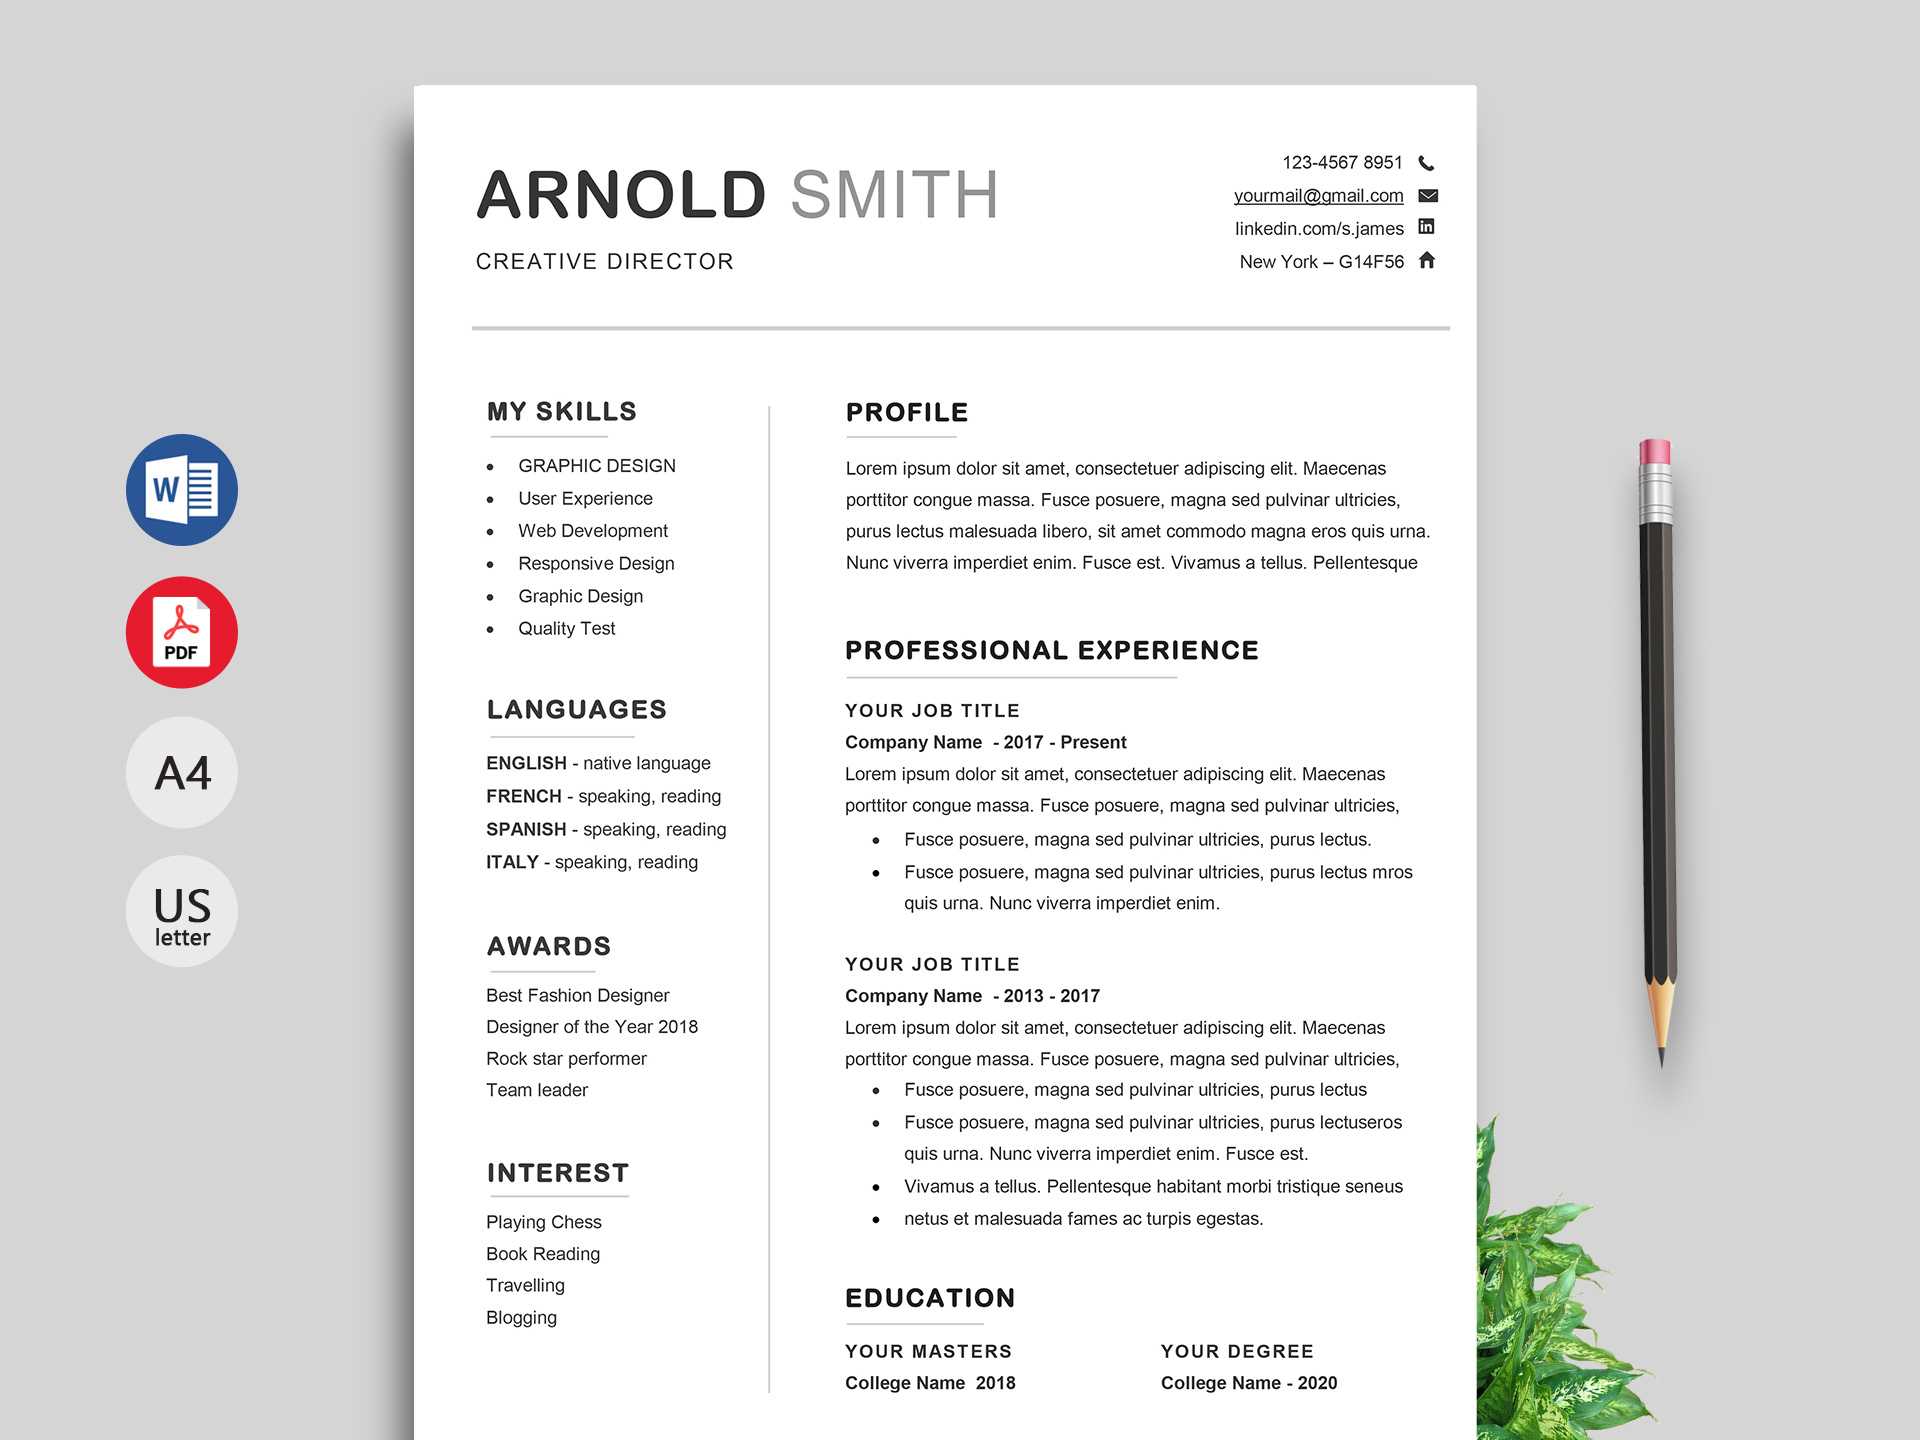 Resume ~ Resume Templates Free Downloads For Microsoft Word With Regard To Free Blank Resume Templates For Microsoft Word